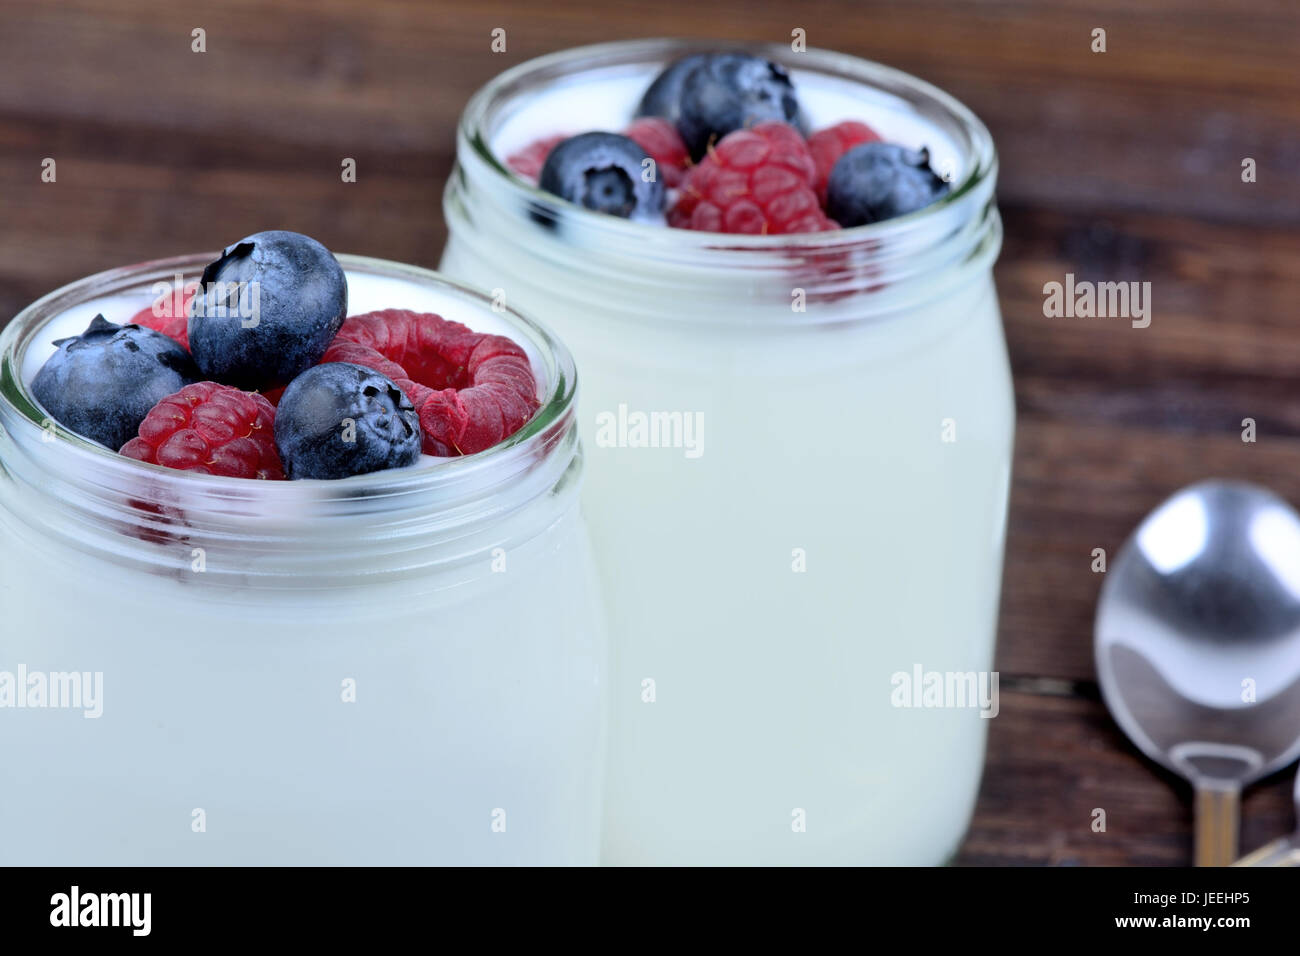 Assorted berries with yogurt in a glass on table Stock Photo